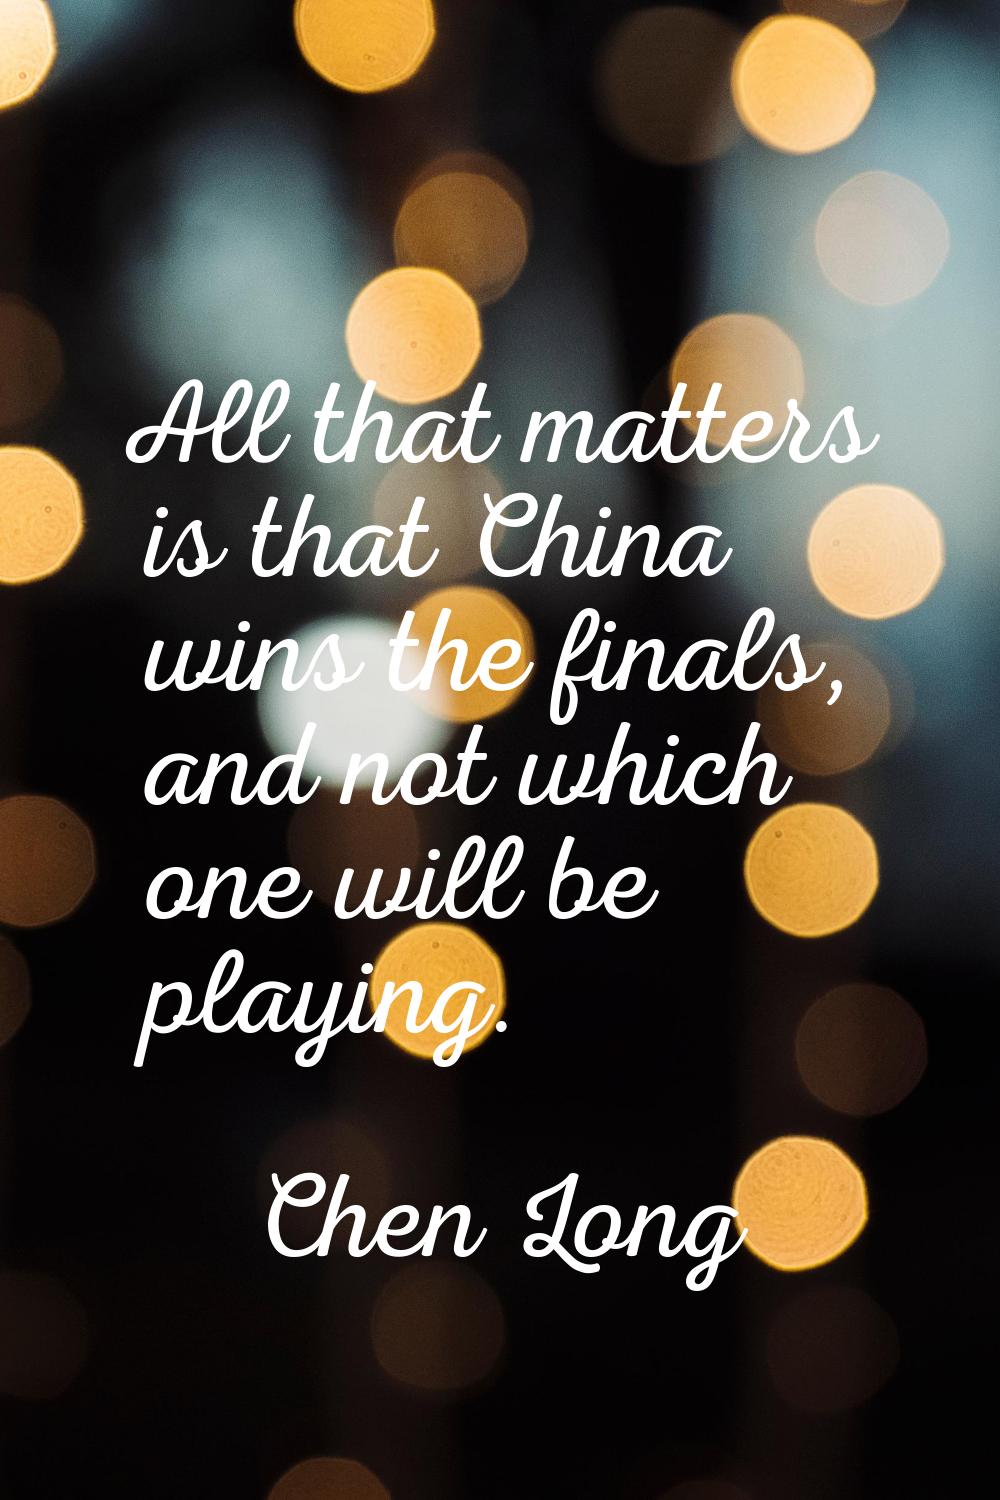 All that matters is that China wins the finals, and not which one will be playing.